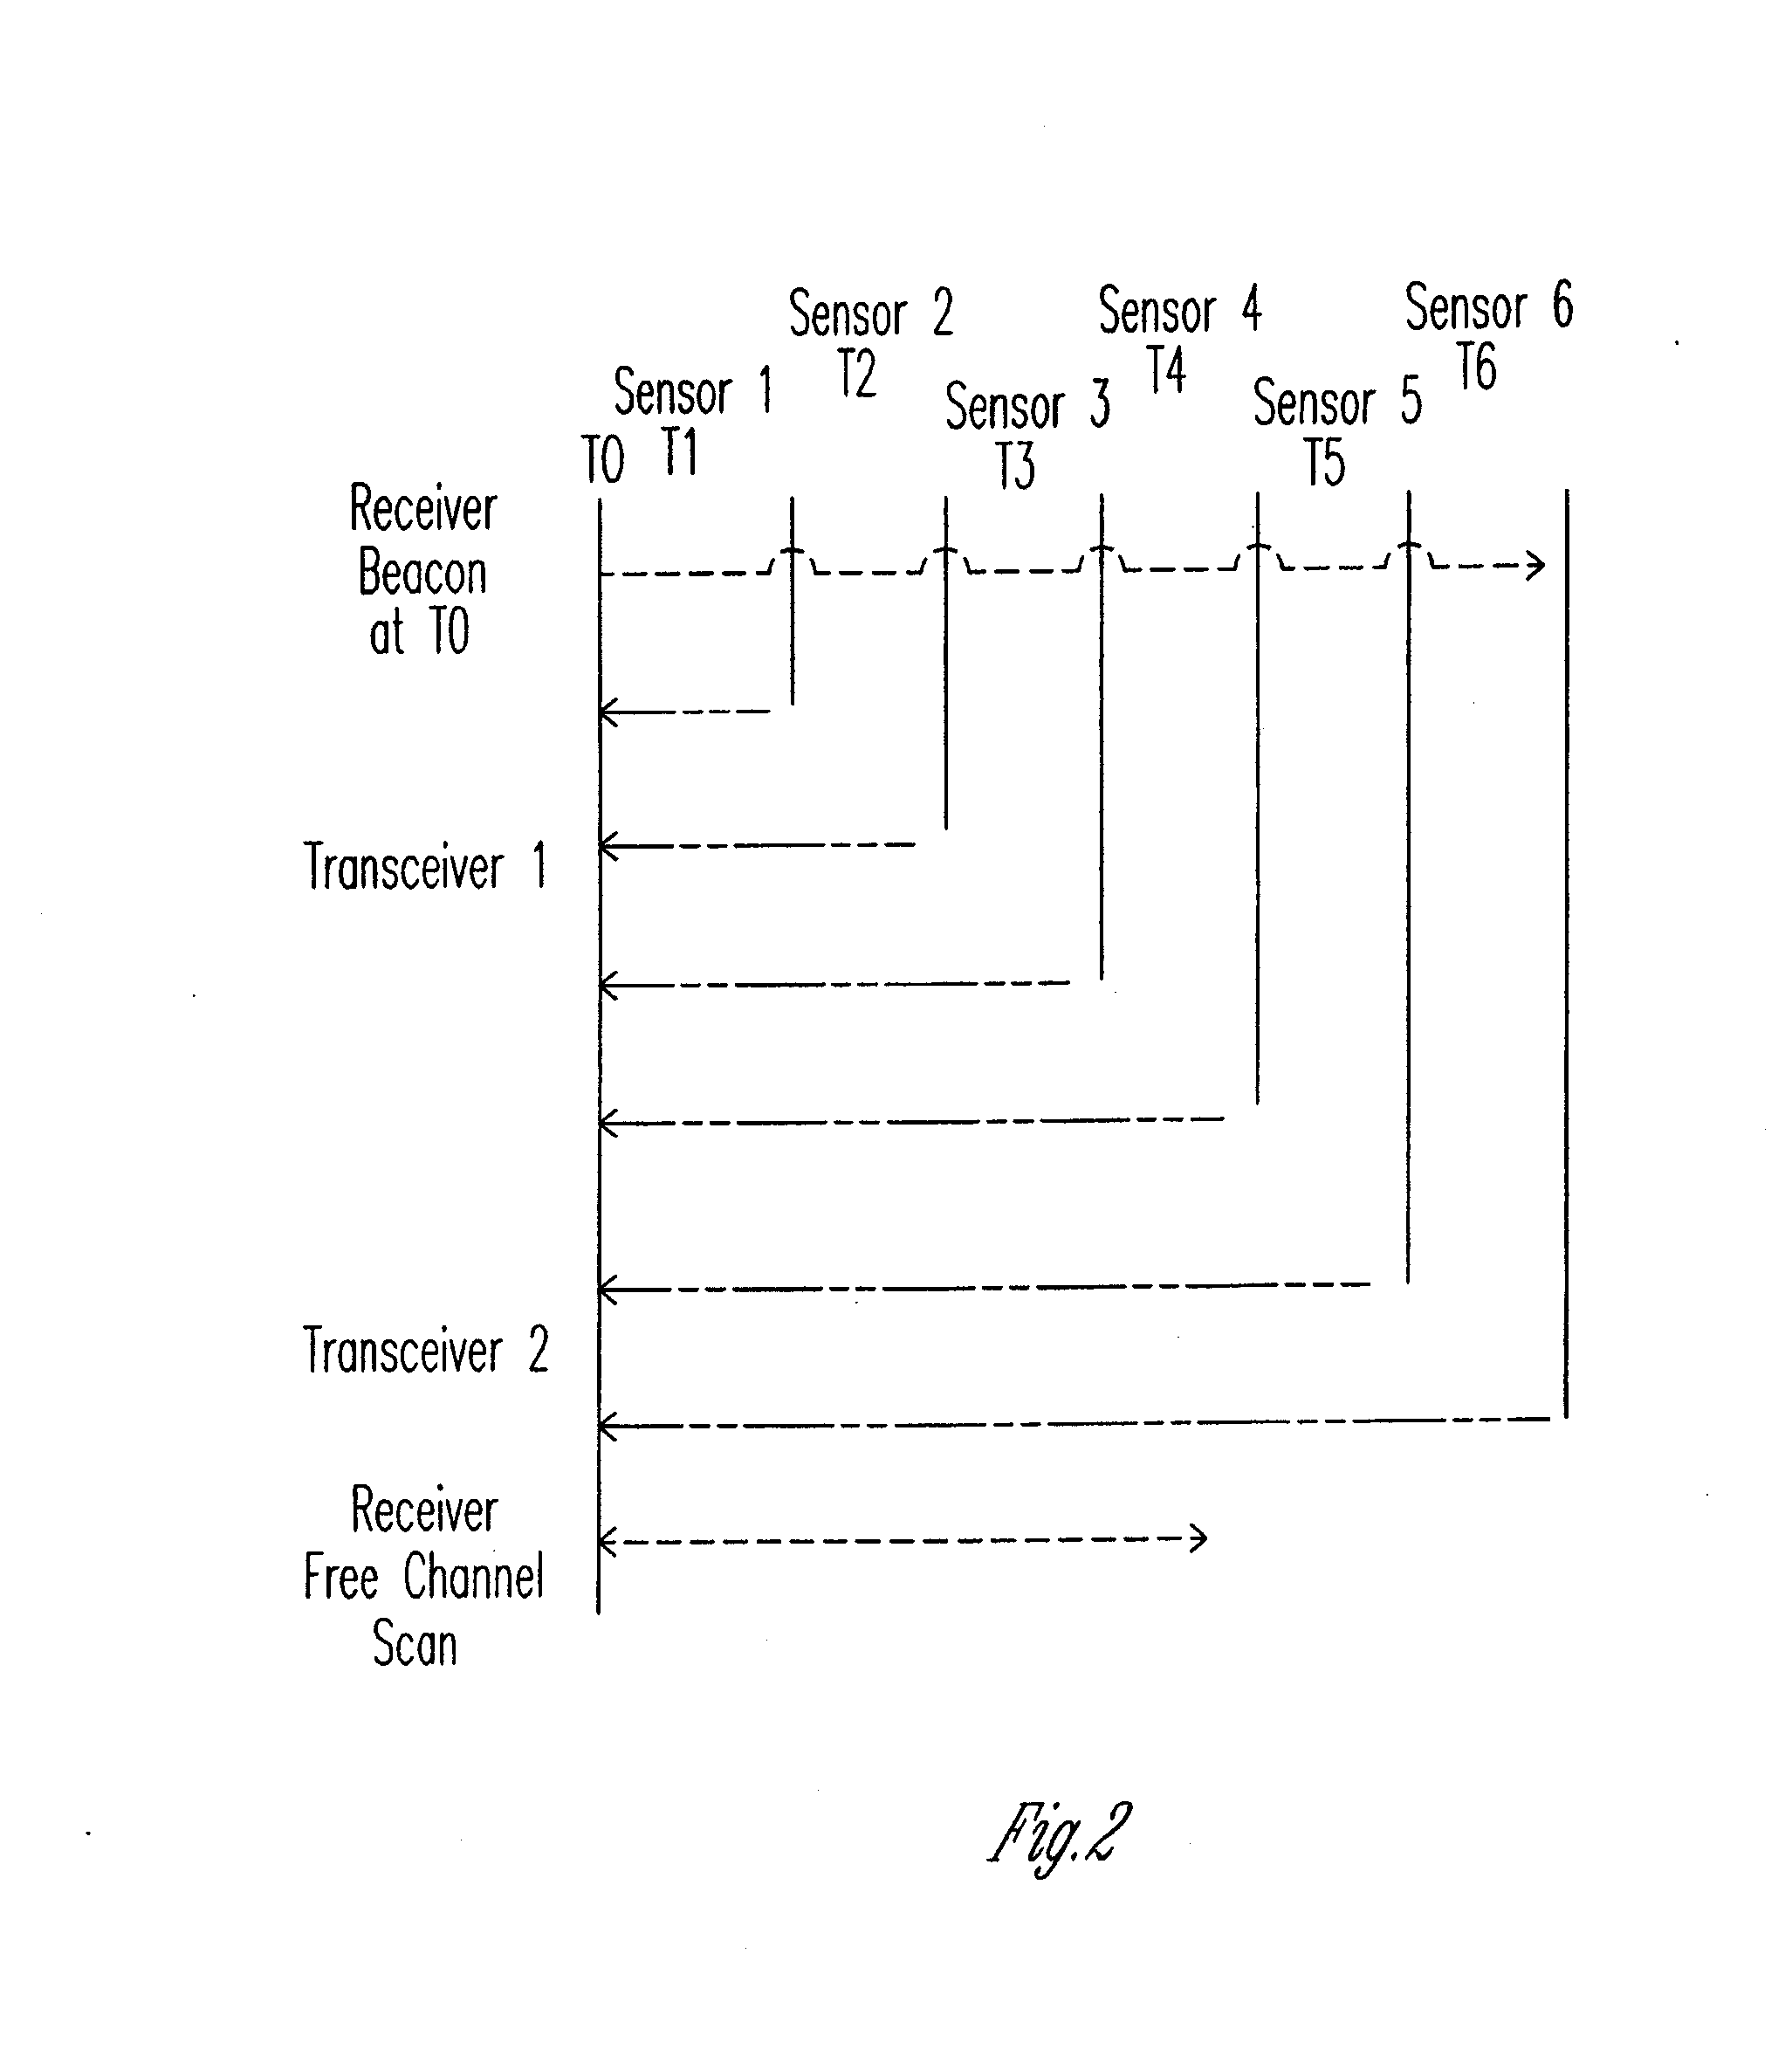 Sensing system for following a stringline